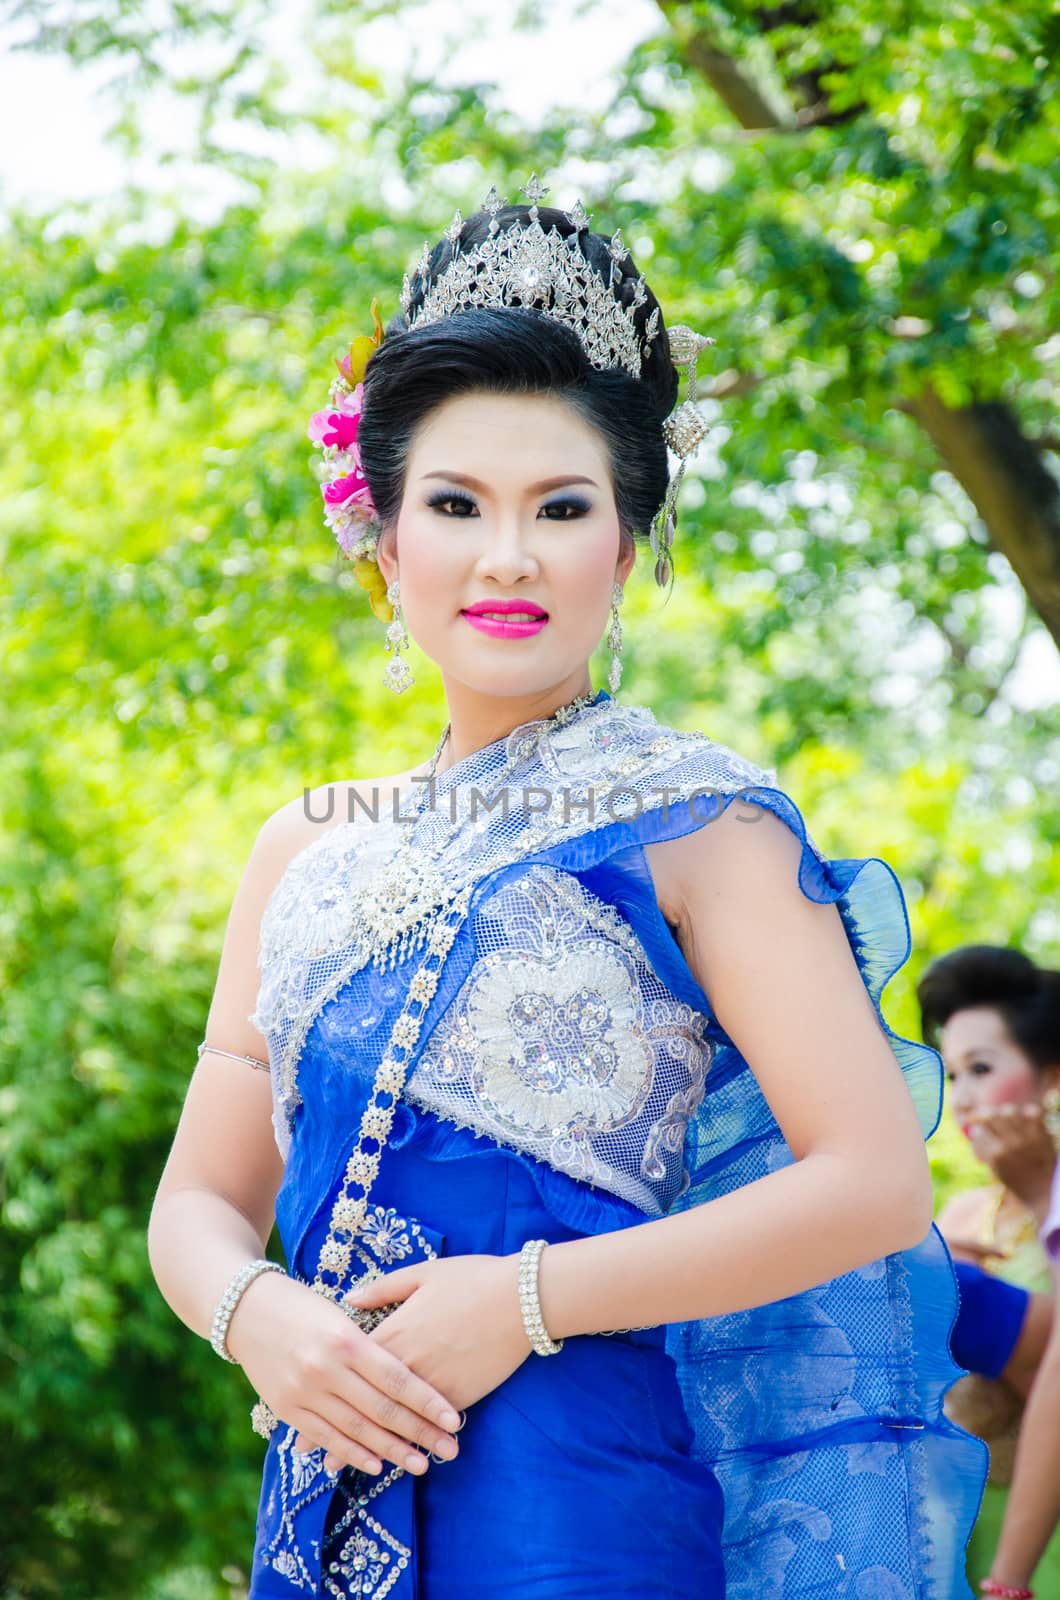 LOPBURI - APRIL 13: Unidentified model in period dress on Songkran Festival is celebrated in Thailand as the traditional New Year's at Banmi district on April 13, 2015 in Lopburi, Thailand